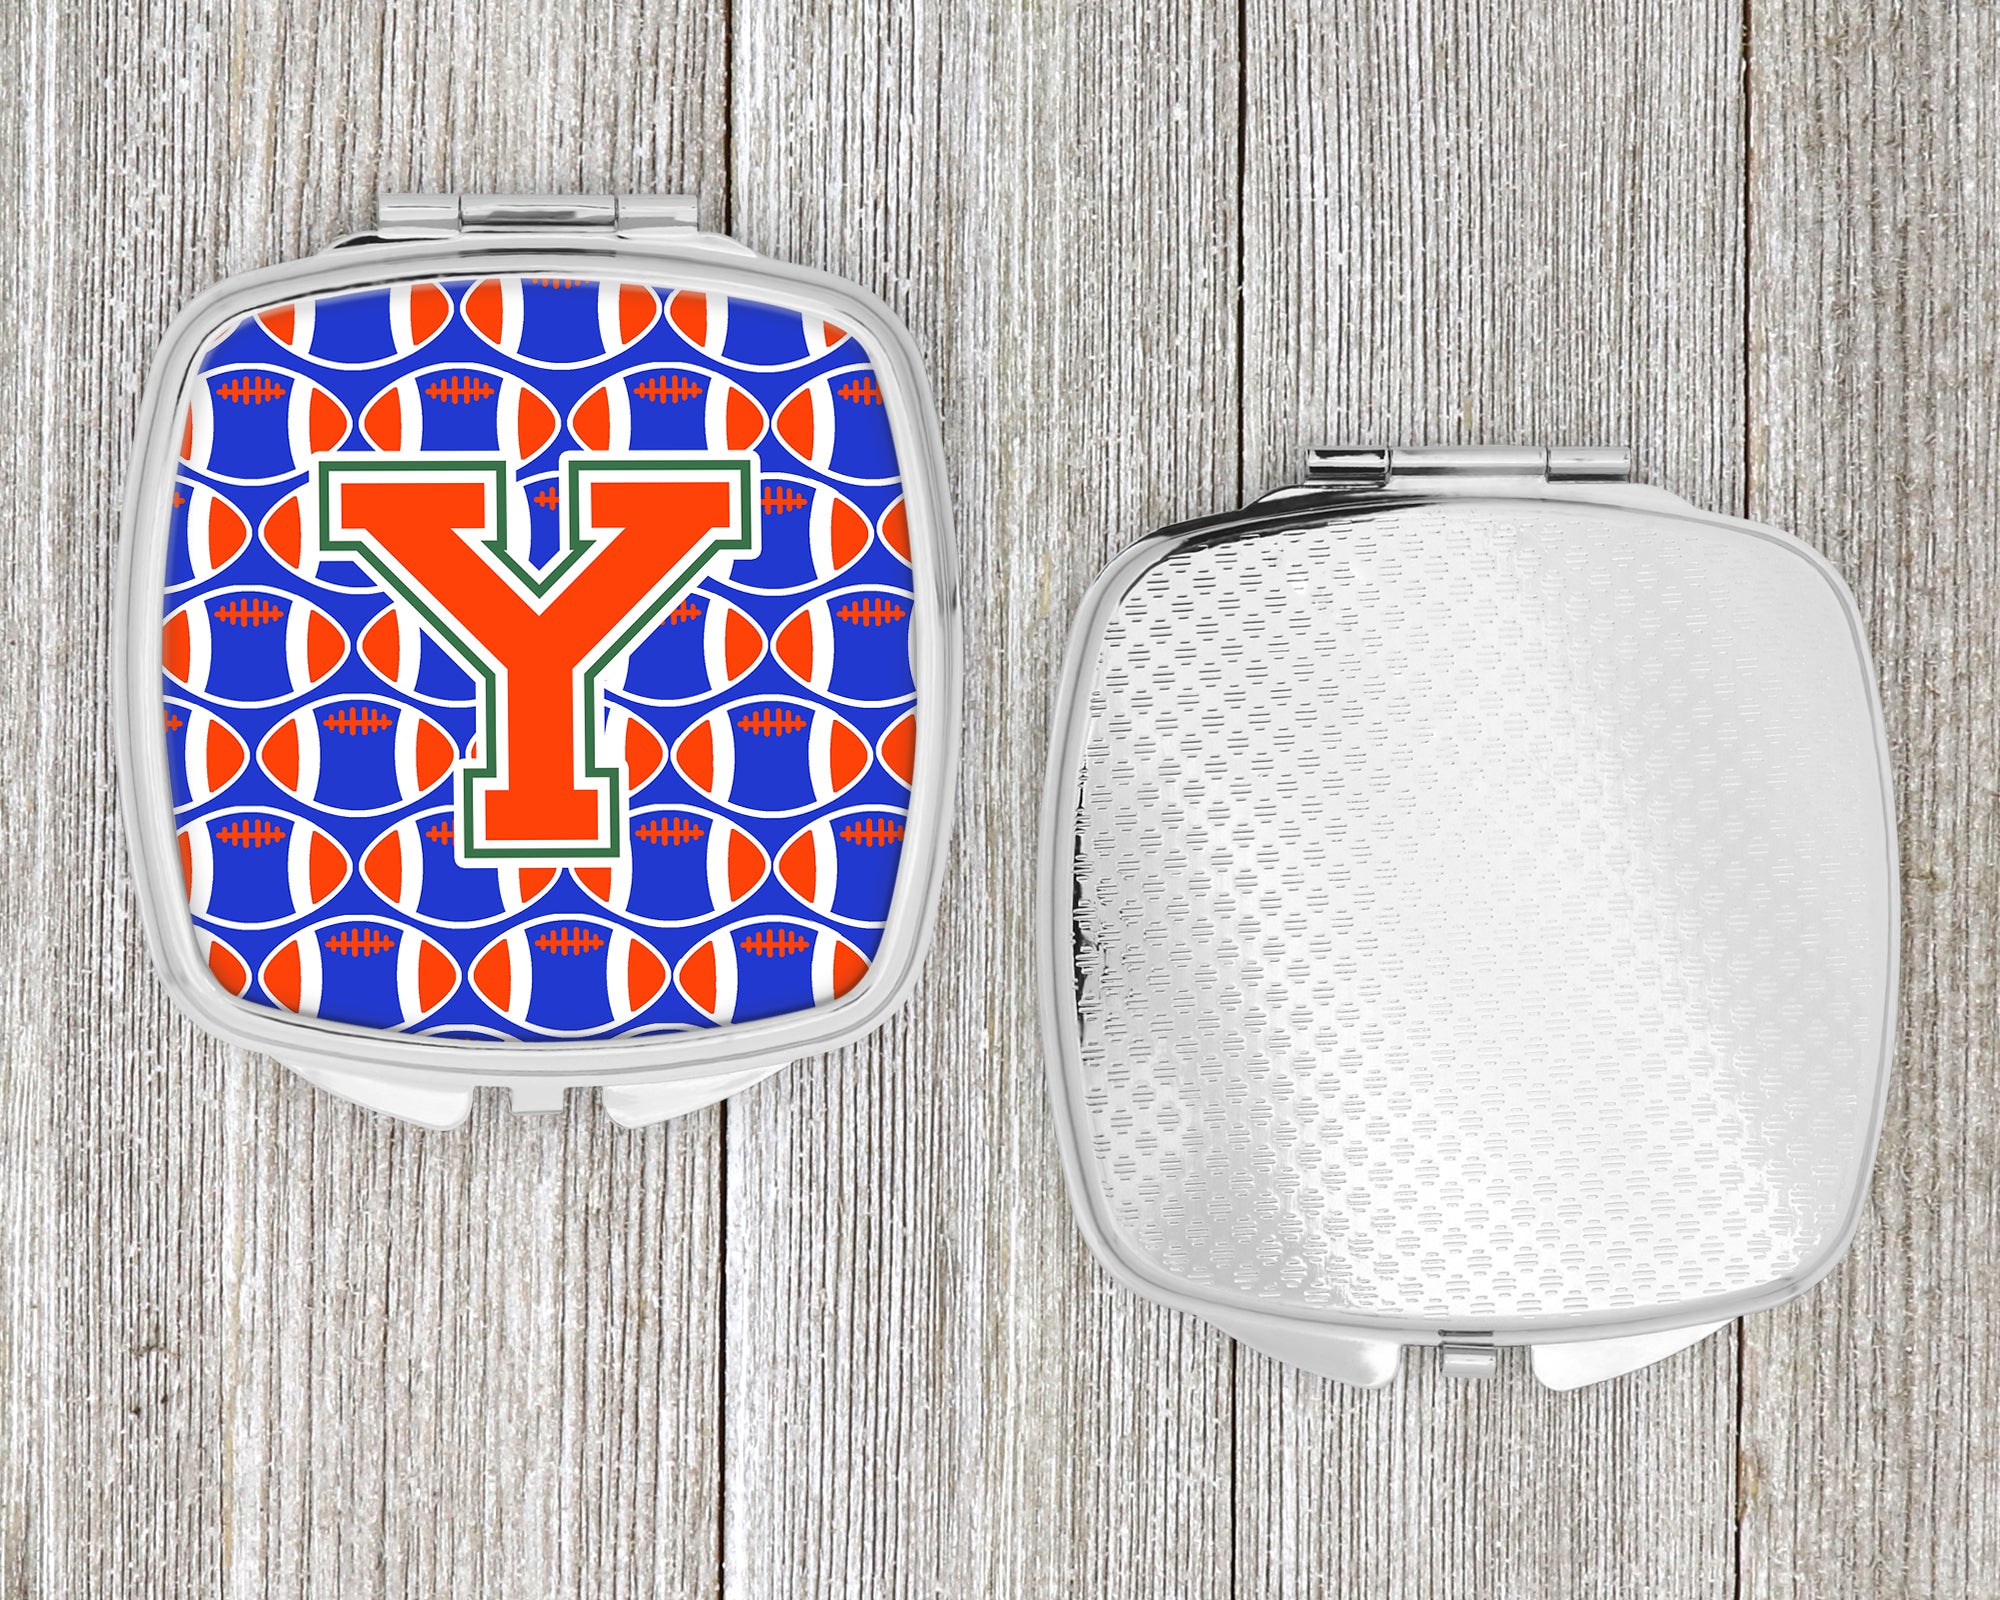 Letter Y Football Green, Blue and Orange Compact Mirror CJ1083-YSCM  the-store.com.